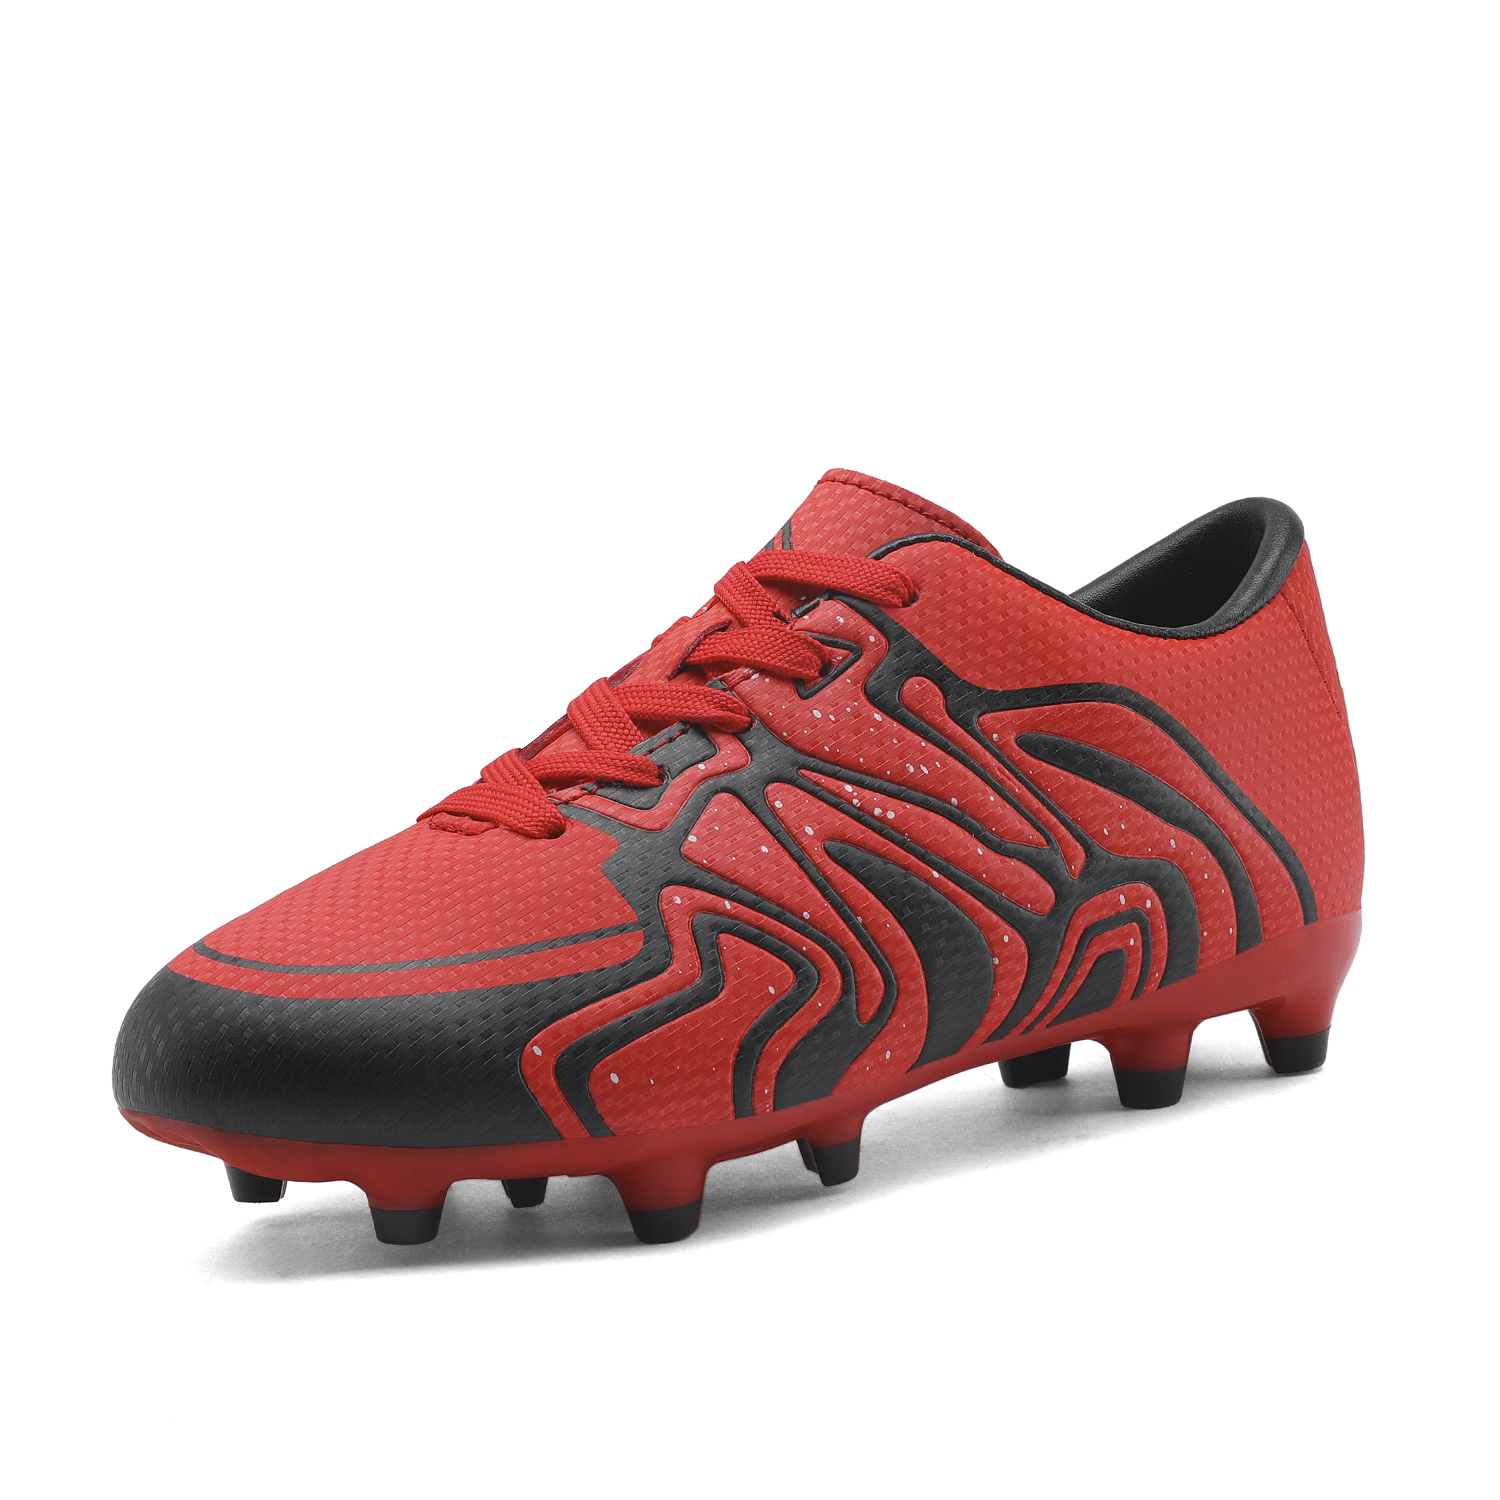 Dream Pairs Kids Boys & Girls Lightweight Soccer Shoes Sport Outdoor Soccer Cleats 160472-K Red/Black/Silver Size 5 - image 1 of 5